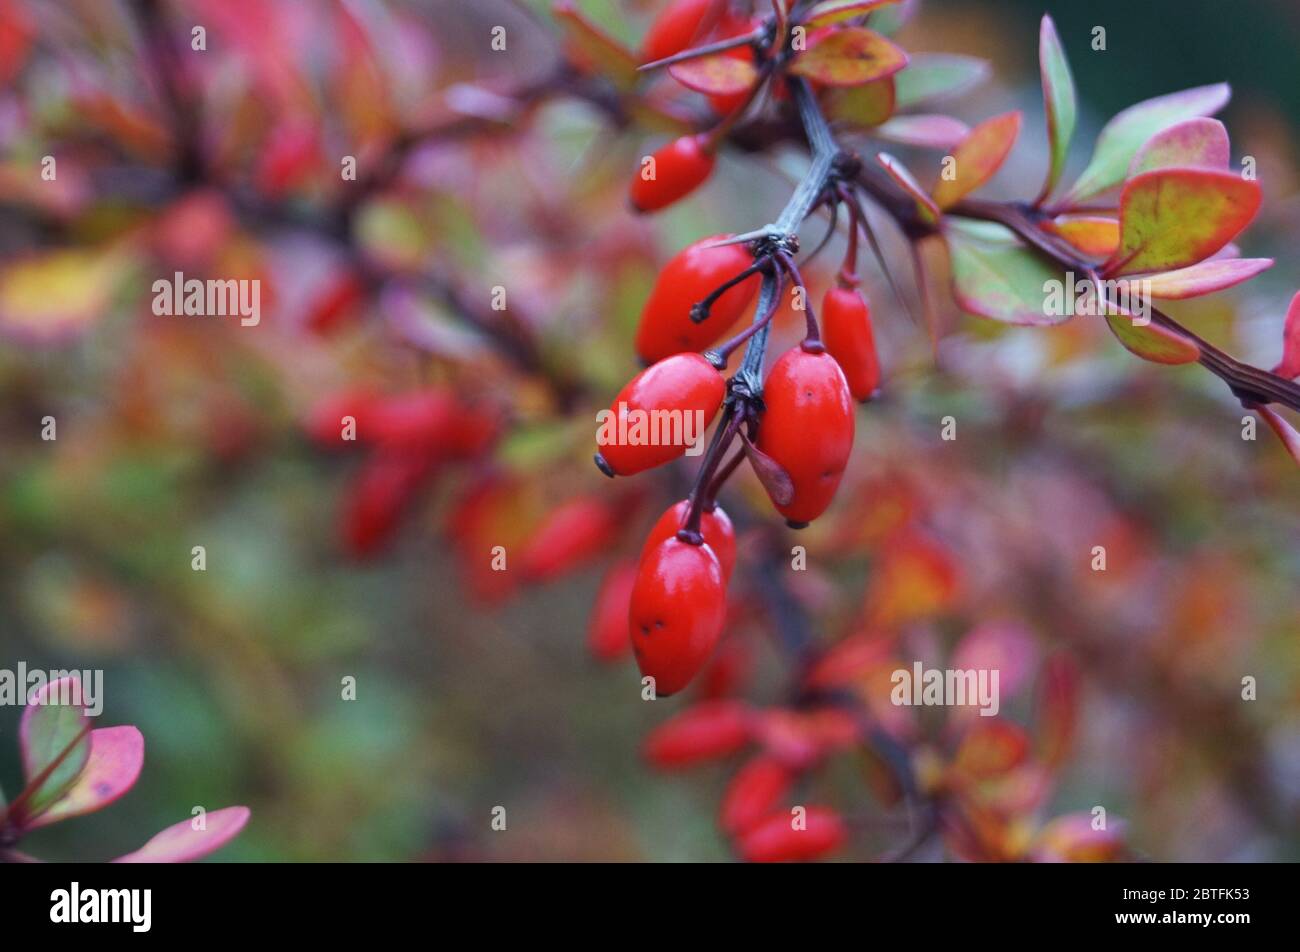 Branches of barberry with red leaves and red ripe fruits on an autumn day Stock Photo